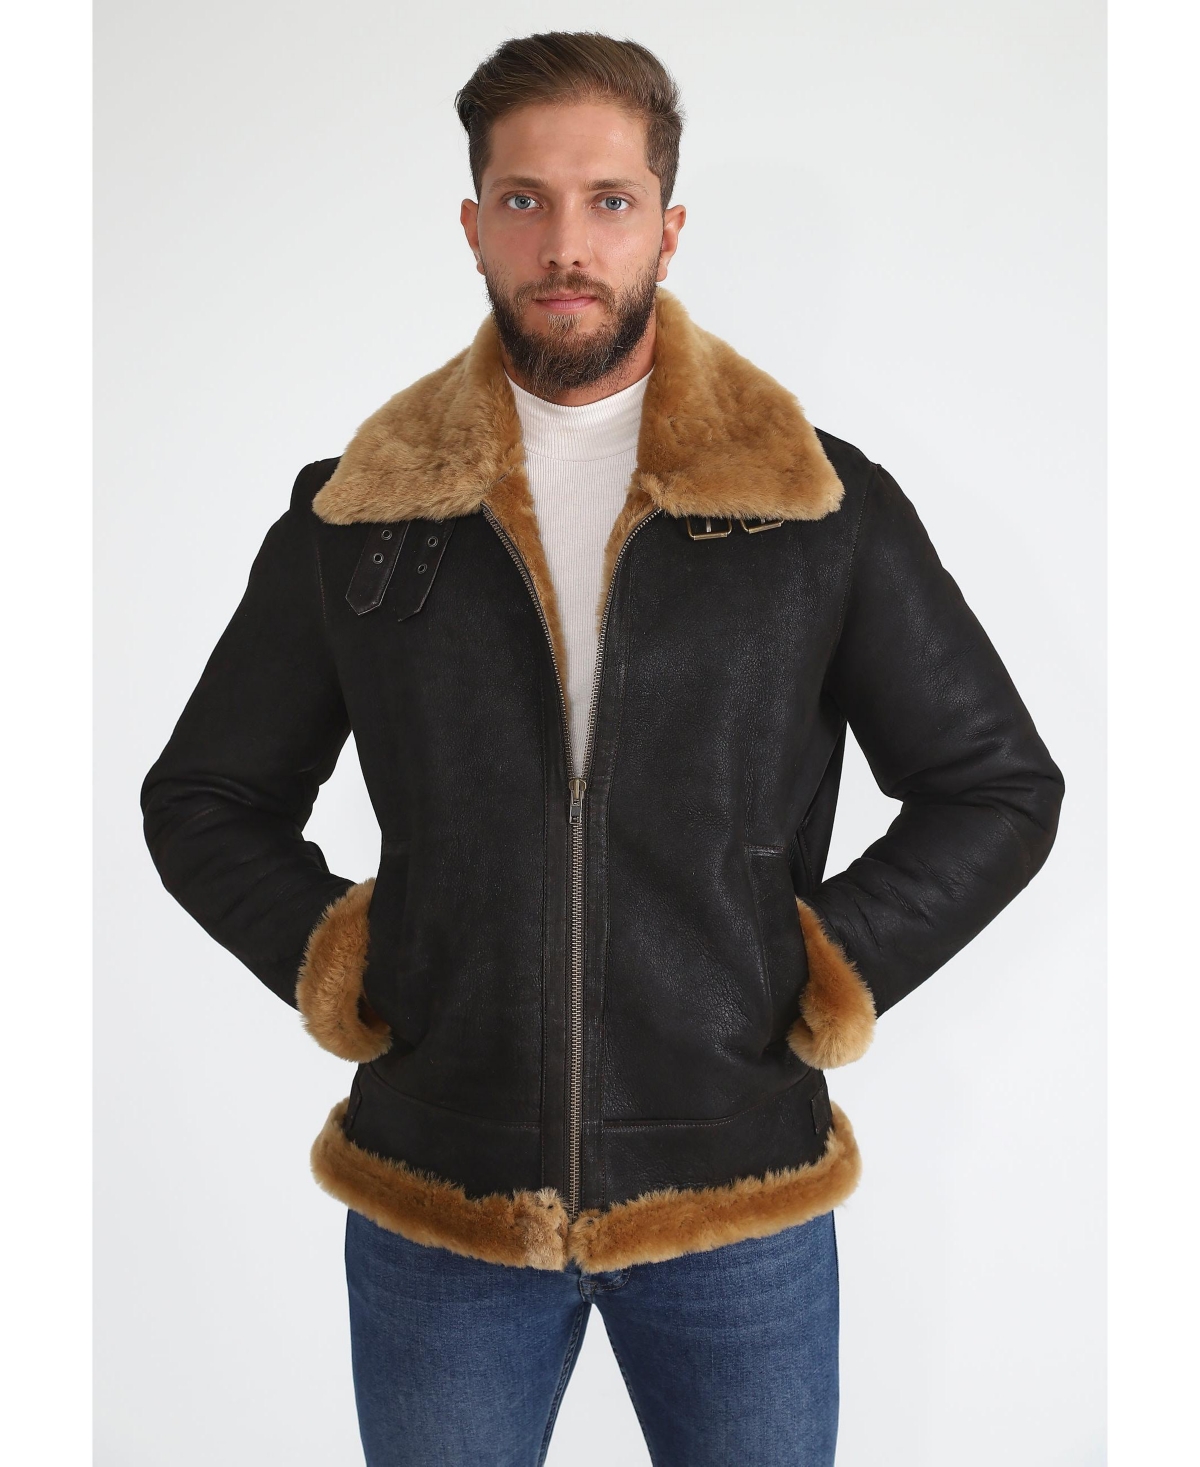 Men's Shearling Aviator Jacket, Washed Brown with Ginger Wool - Black